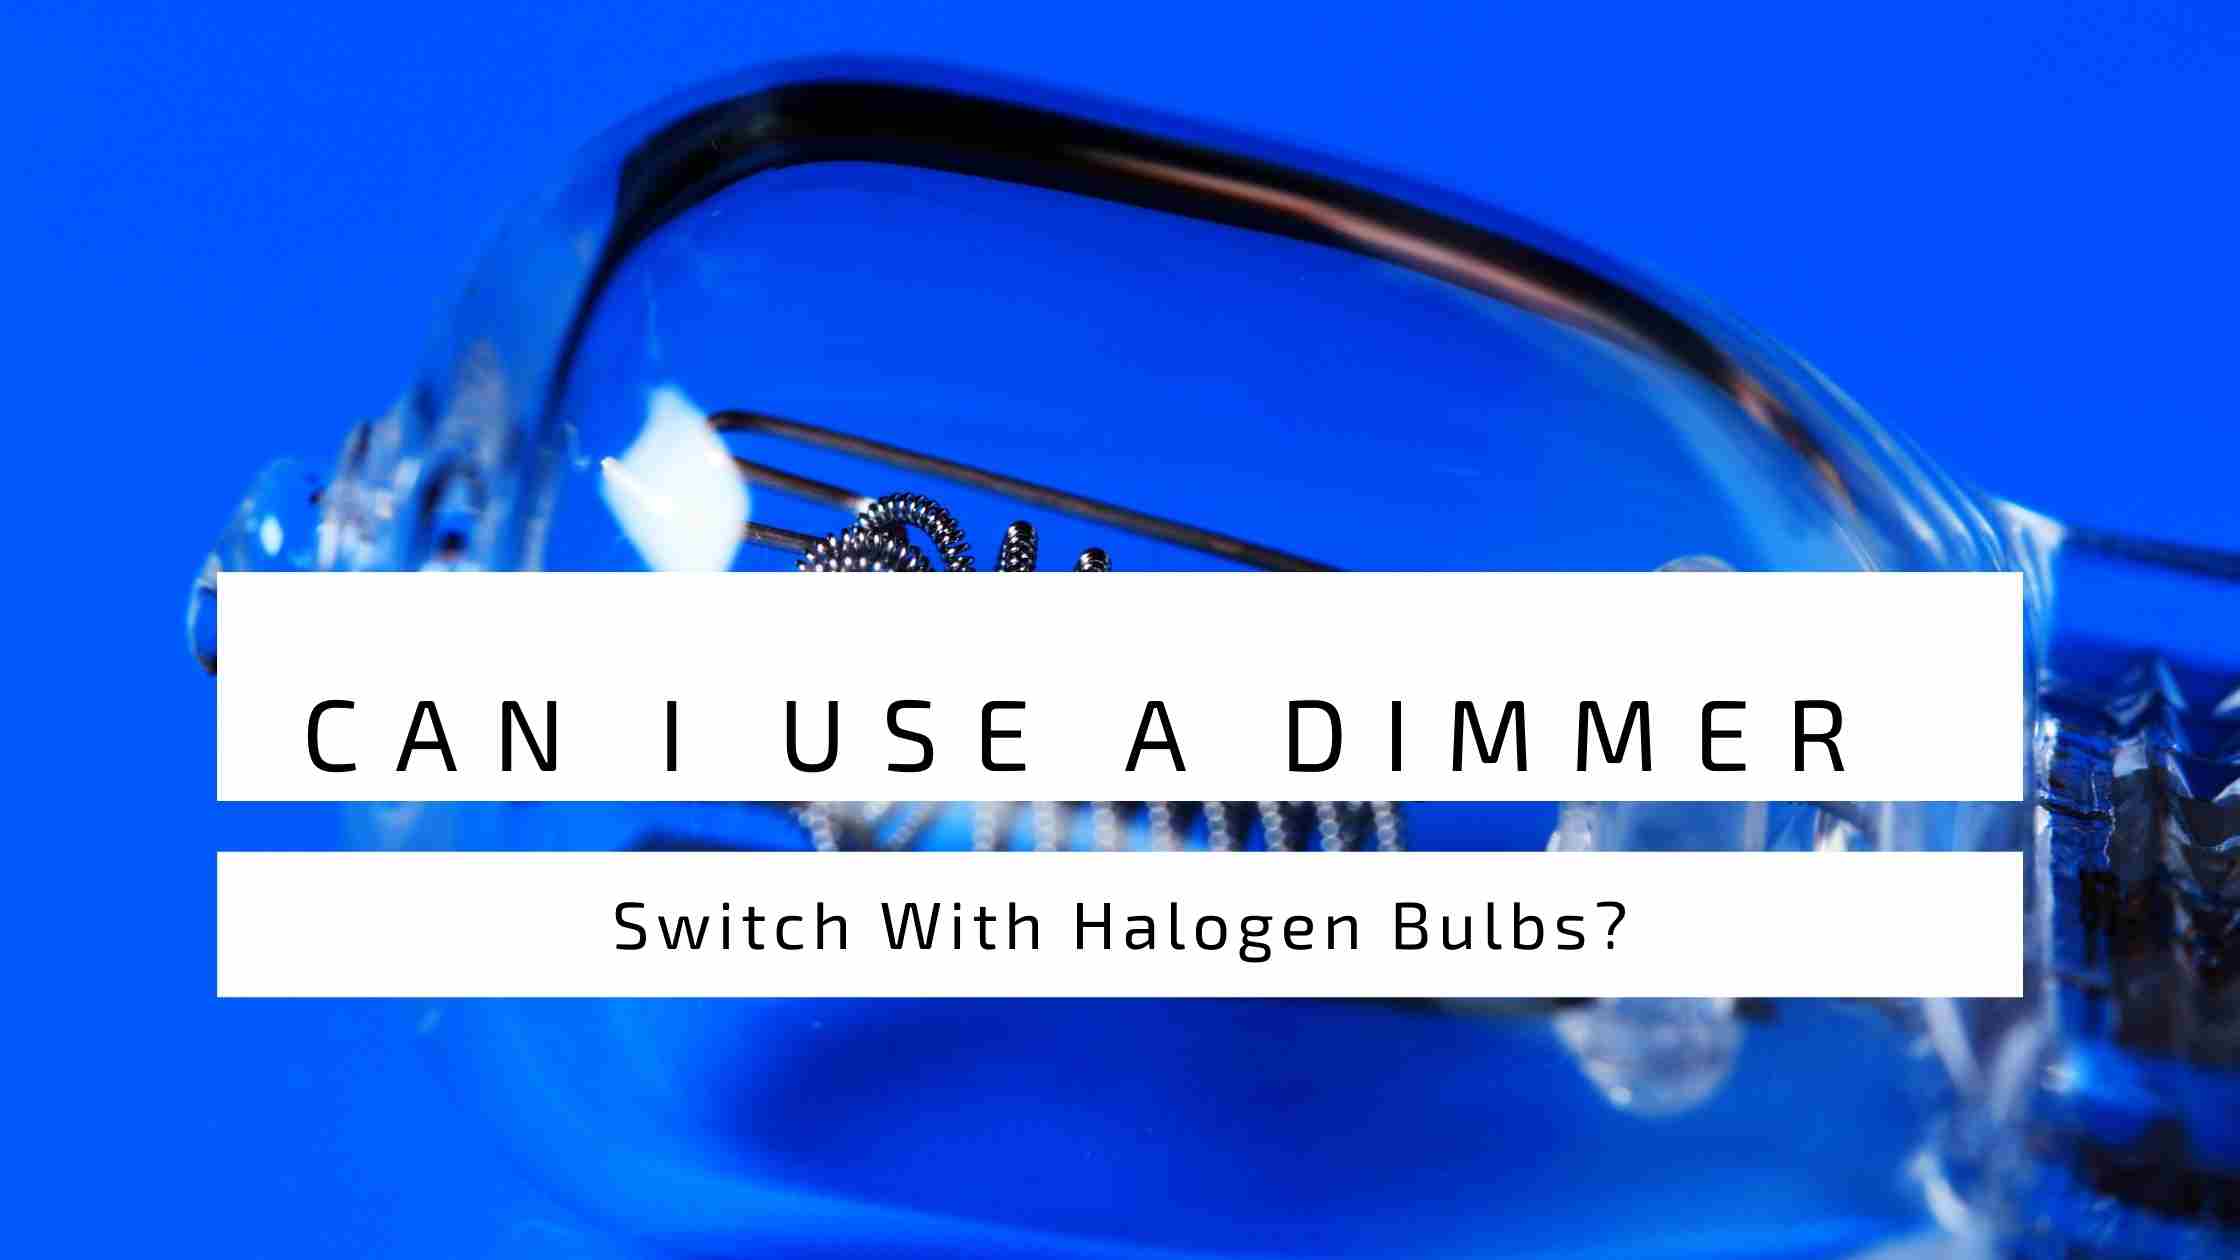 Can I Use A Dimmer Switch With Halogen Bulbs?